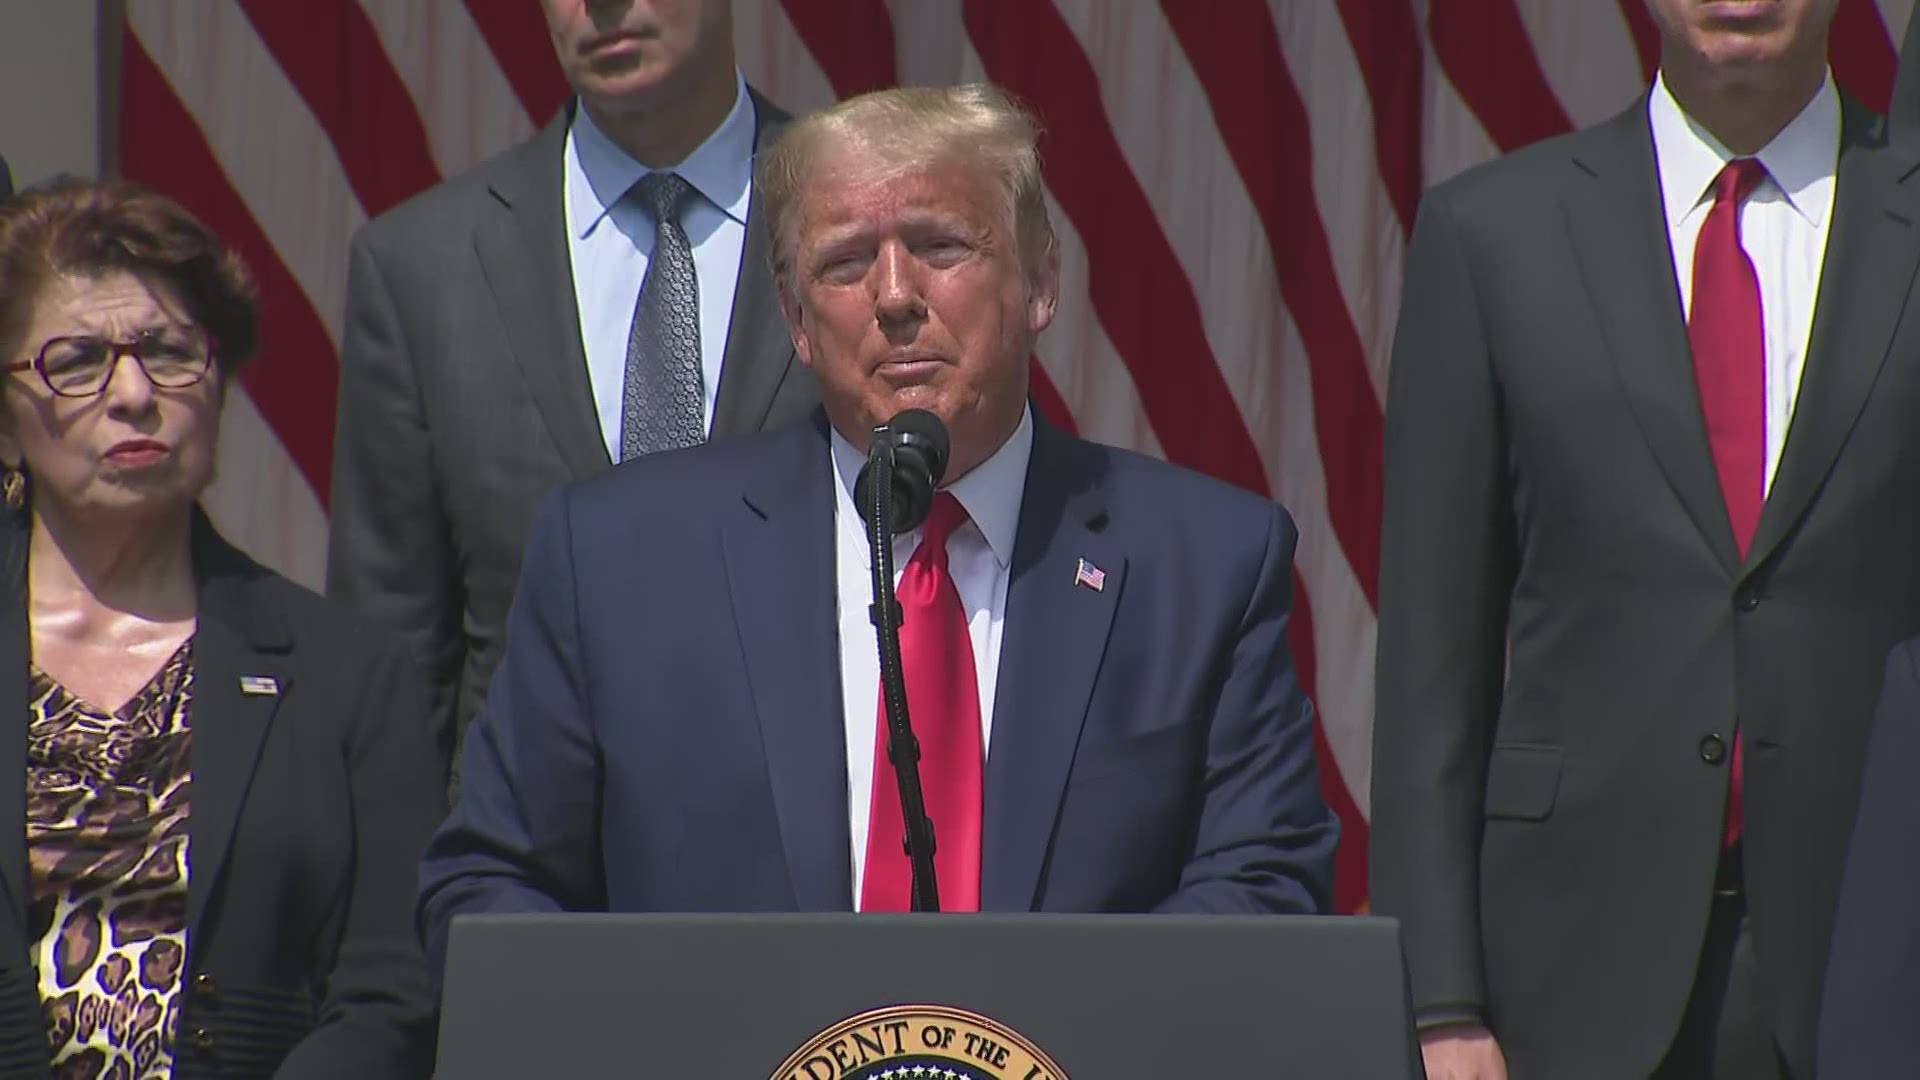 'Hopefully, George is looking down right and saying this is a great thing that’s happening for our country,' President Trump said.